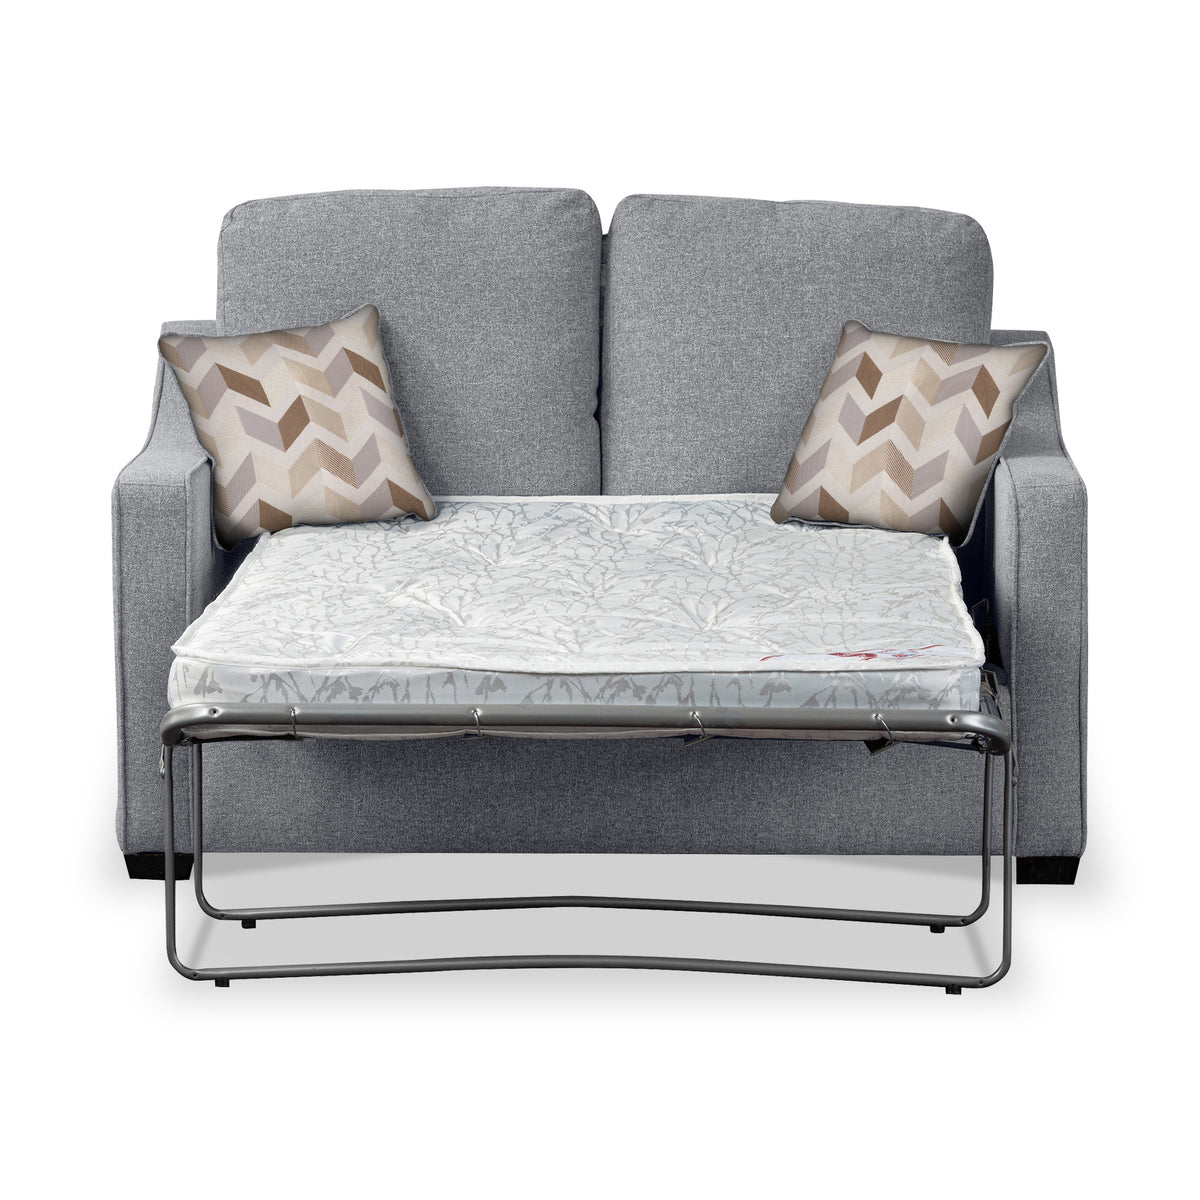 Charlcote Silver Faux Linen 2 Seater Sofabed with Oatmeal Scatter Cushions from Roseland Furniture